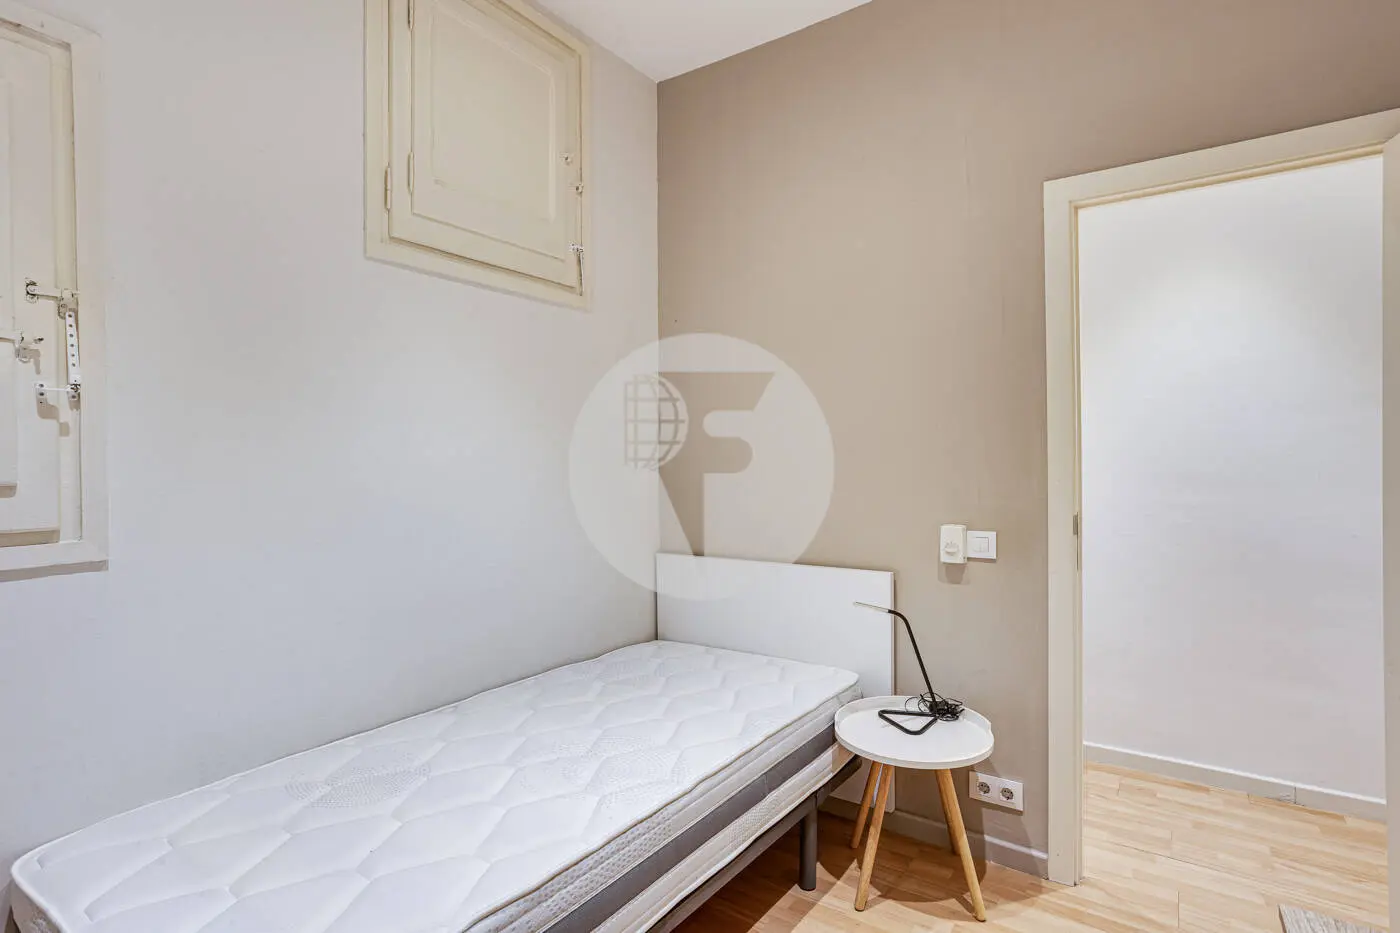 Magnificent apartment for sale next to Pl Universitat of 114m2 according to the land registry, located on Tallers Street in the Ciutat Vella neighborhood of Barcelona 20